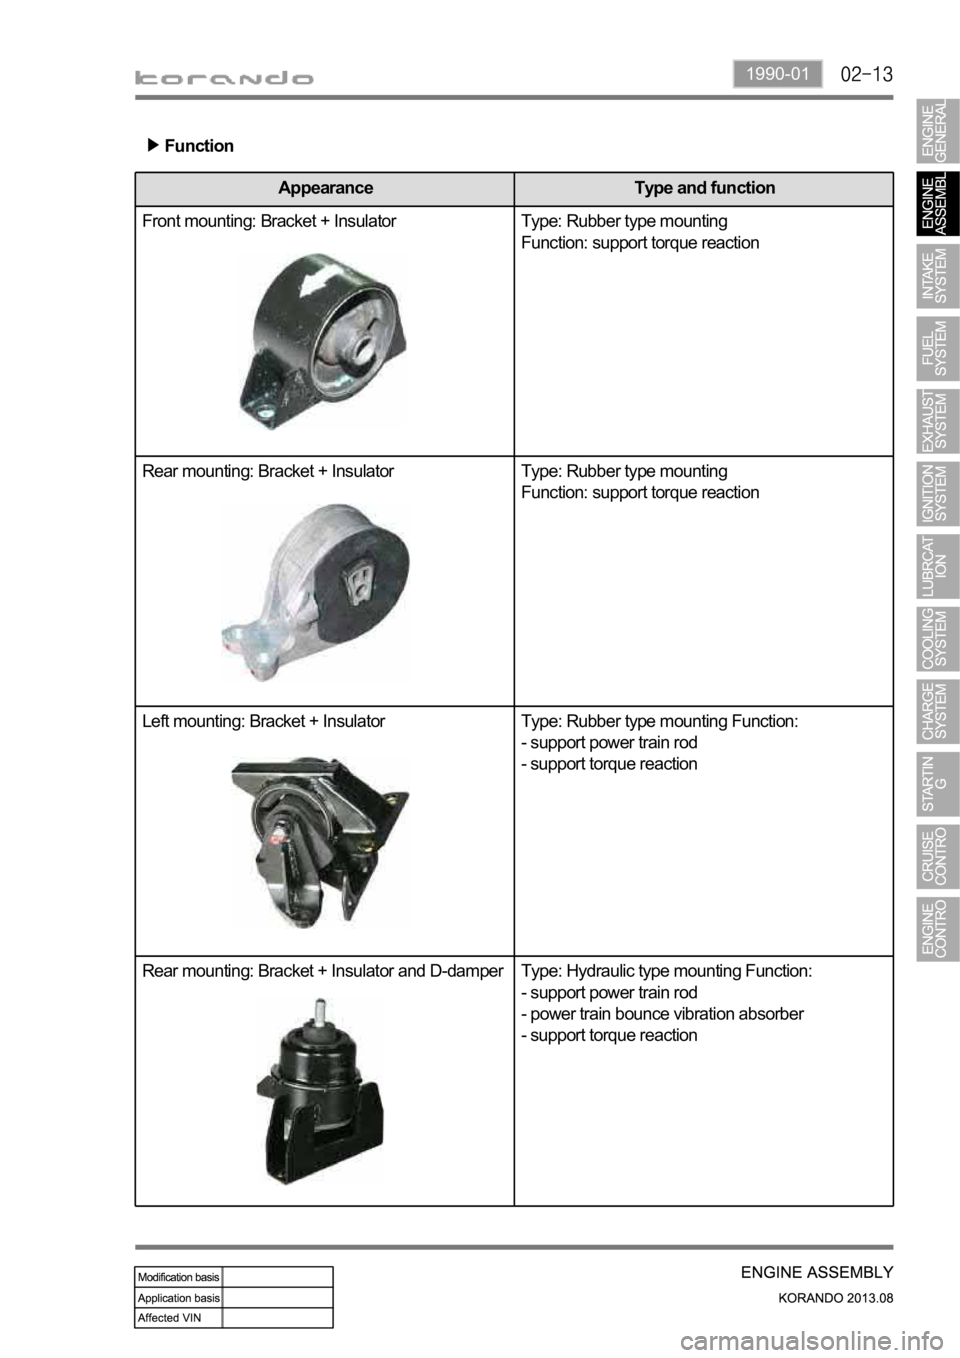 SSANGYONG KORANDO 2013  Service Manual 1990-01
Function
Appearance Type and function
Front mounting: Bracket + Insulator Type: Rubber type mounting
Function: support torque reaction
Rear mounting: Bracket + Insulator Type: Rubber type moun